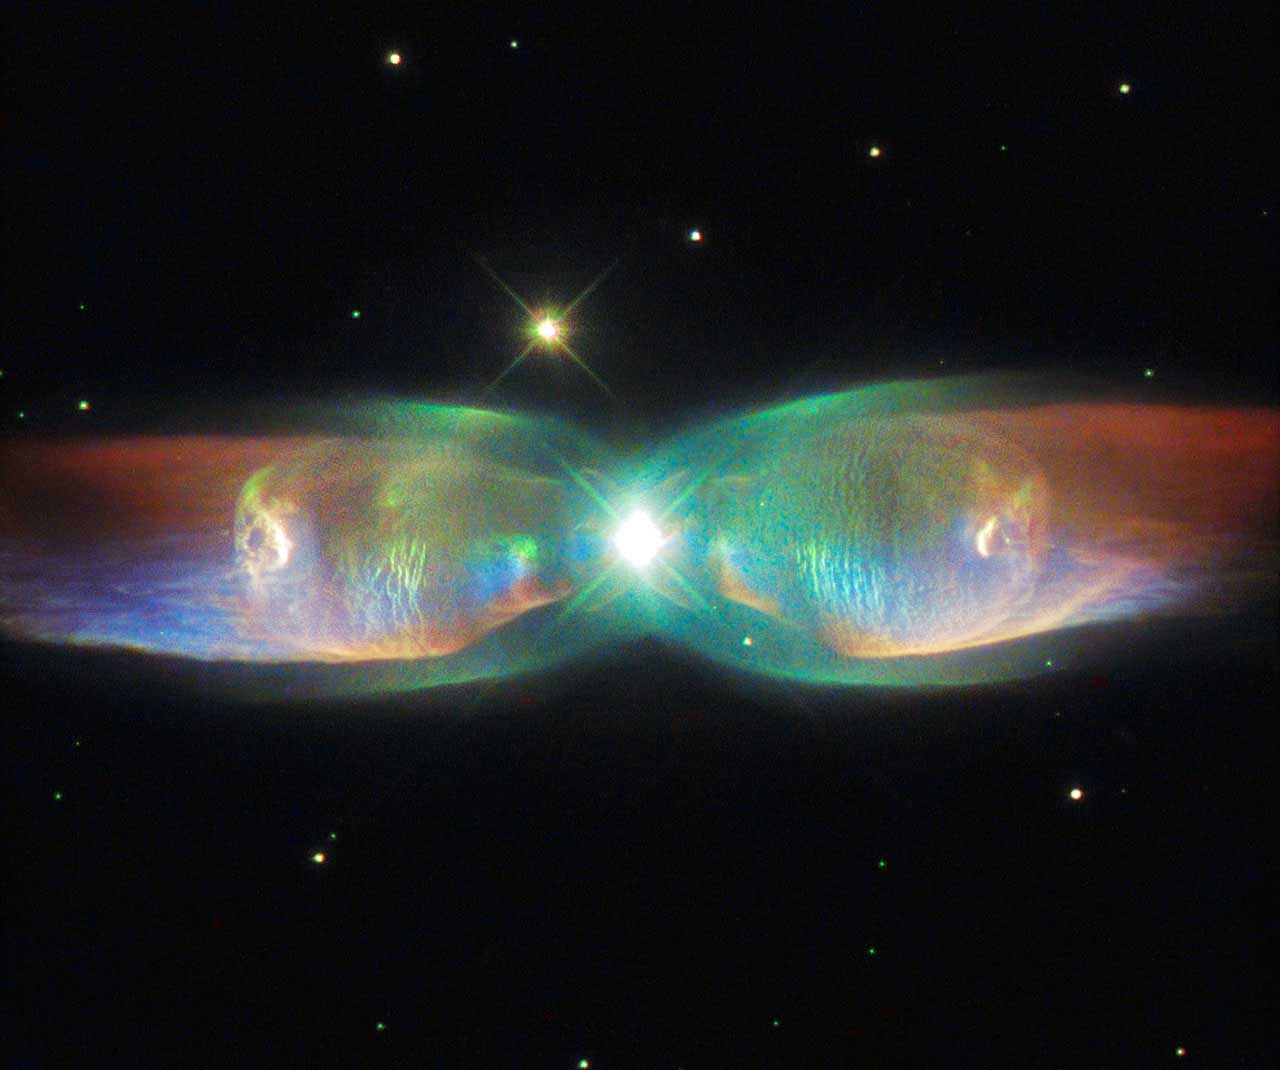 The Twin Jet Nebula, or PN M2-9, is a striking example of a bipolar planetary nebula, formed when the central object is not a single star, but a binary system. An earlier image of the Twin Jet Nebula using data gathered by Hubble’s Wide Field Planetary Camera 2 was released in 1997. This newer version released on Aug. 26, 2015 incorporates more recent observations from the telescope’s Space Telescope Imaging Spectrograph.